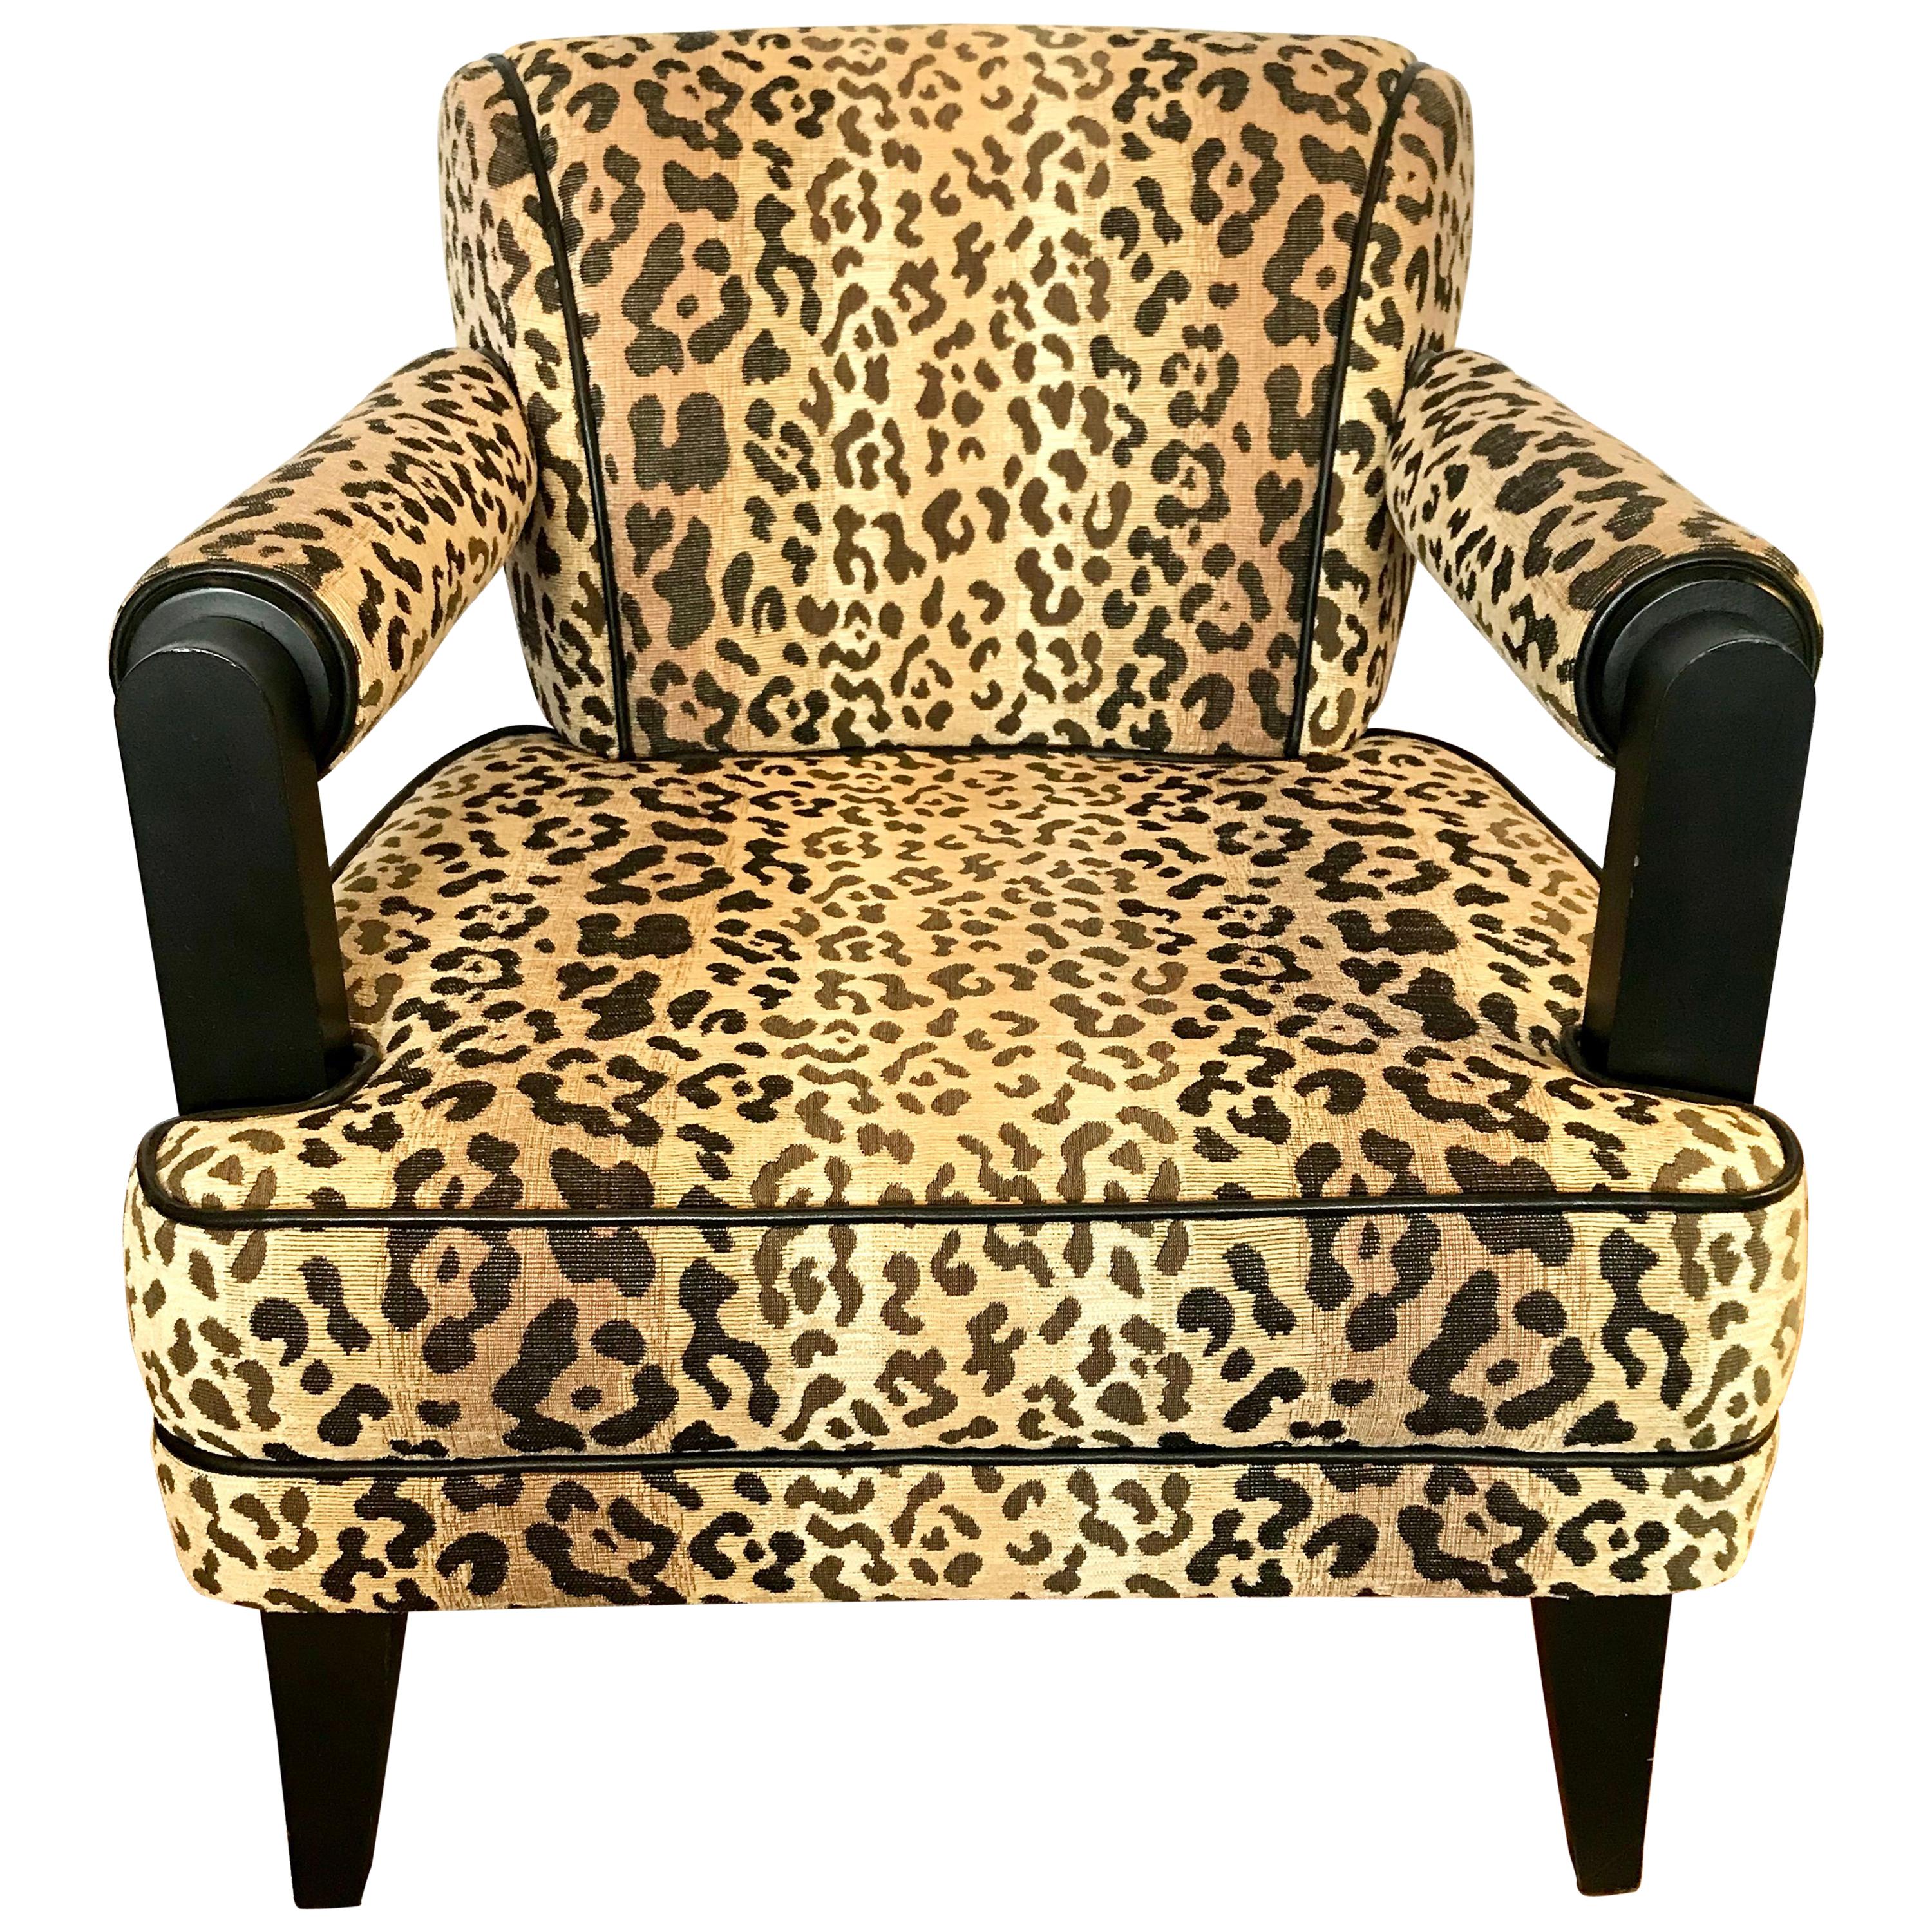 Larry Laslo for Directional Leopard Lounge Chair